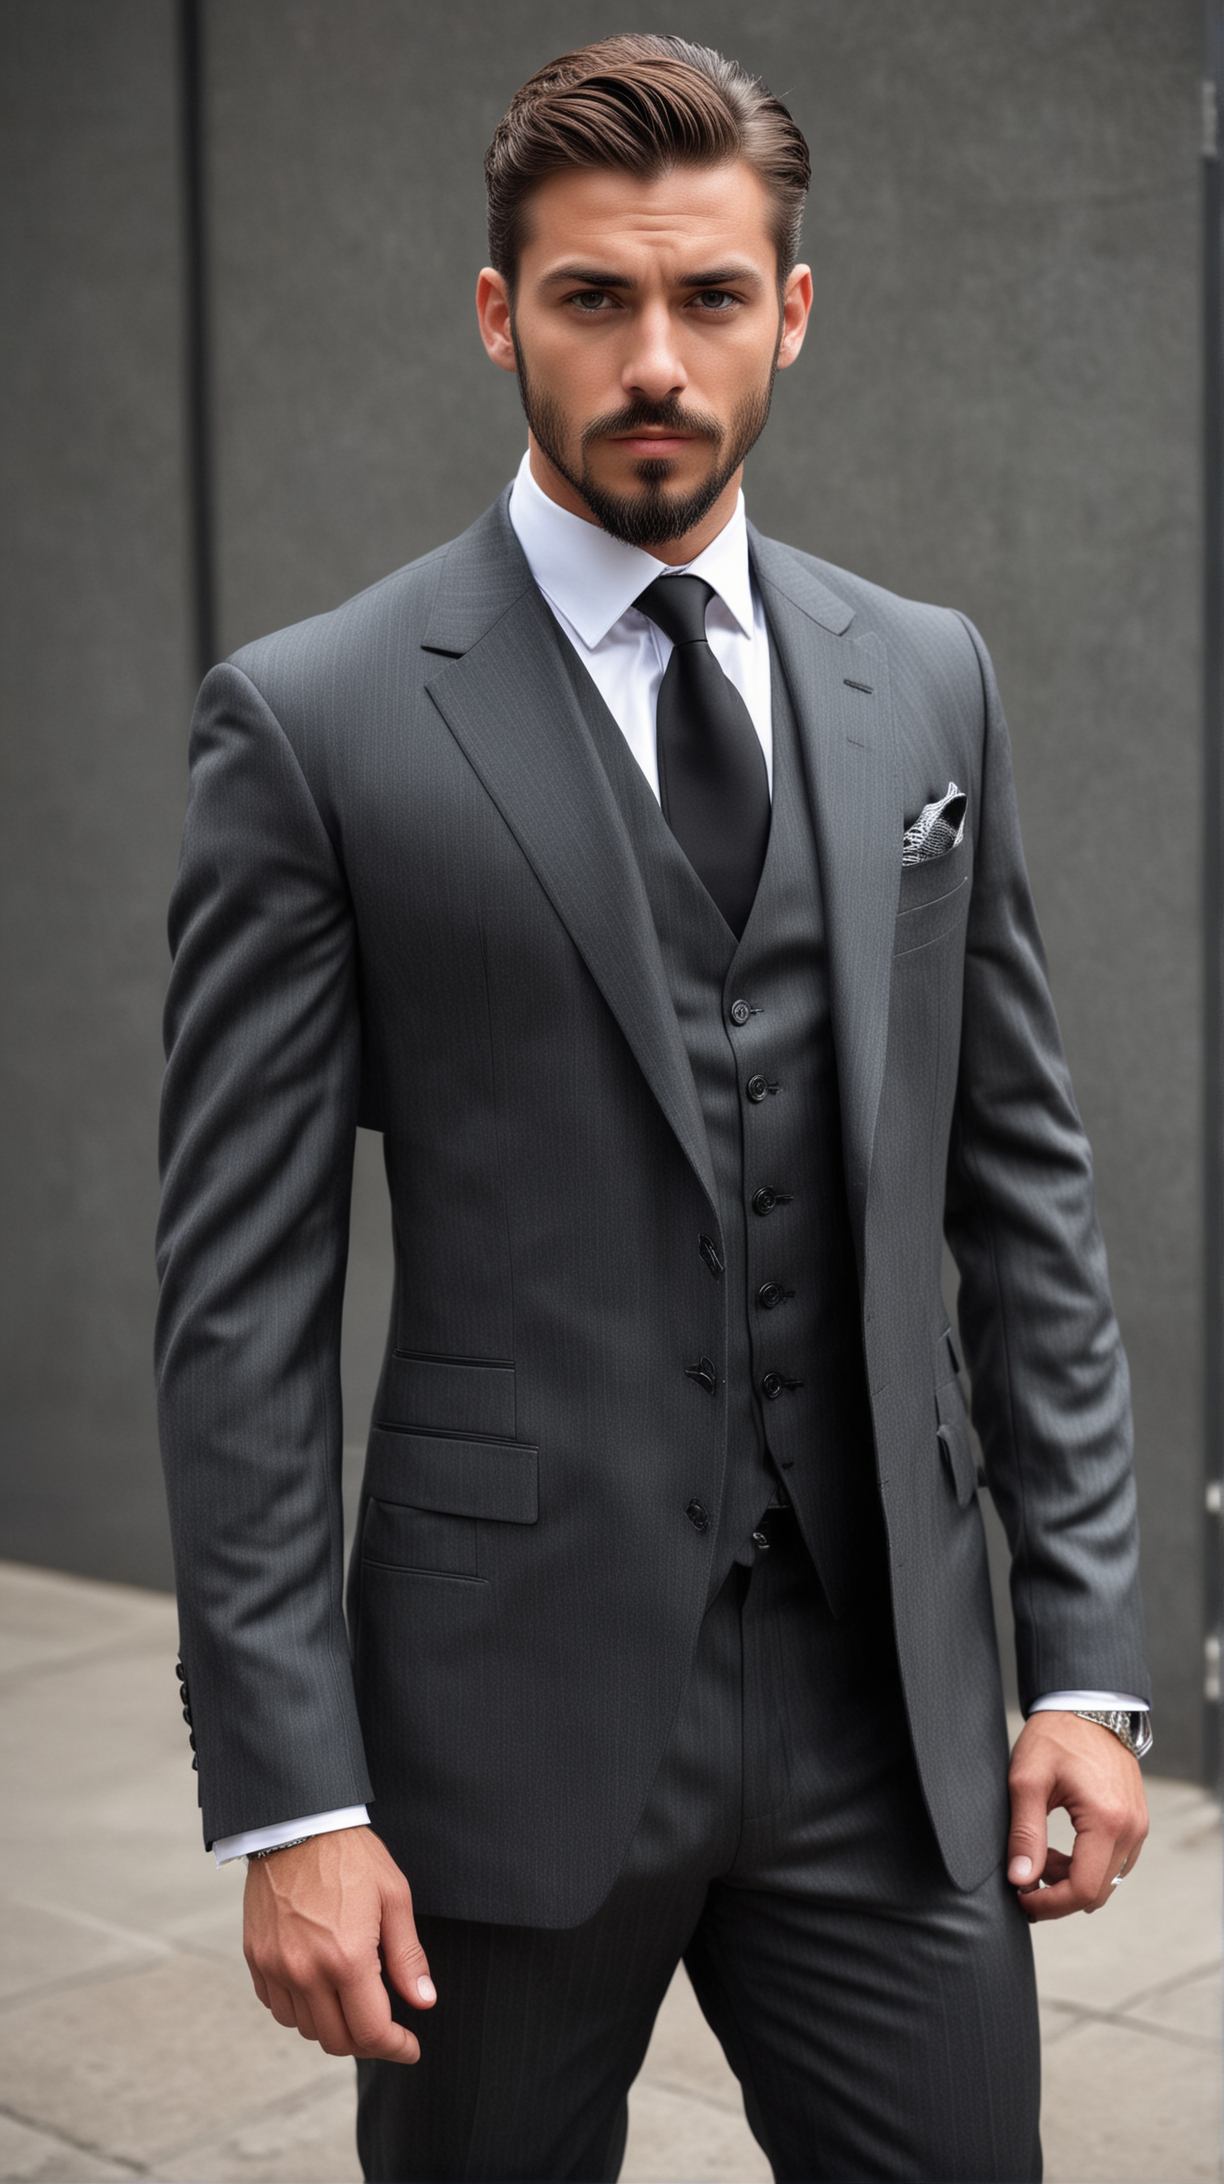 businessman
striking figure
sharp features
confident 
neatly groomed facial hair
powerful
dangerous
piercing eyes
tailored suits
authority figure
sophistication
full body